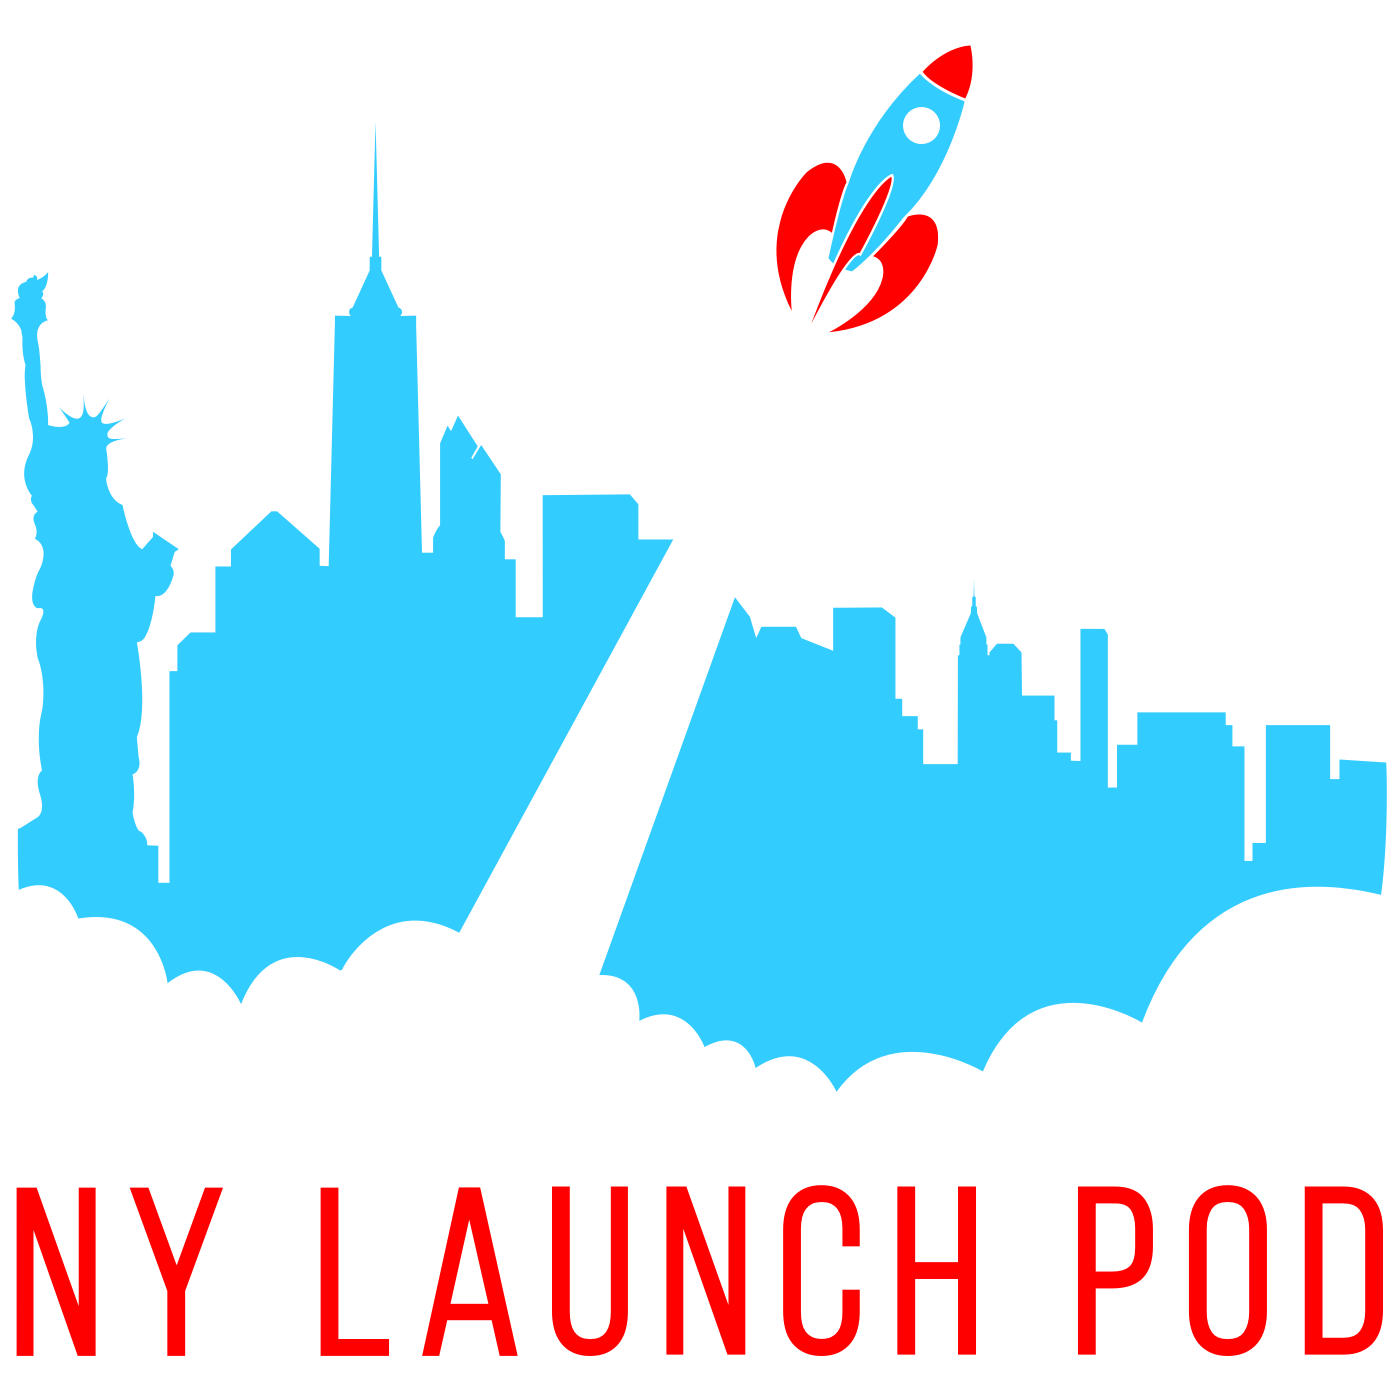 New York Launch Pod: A Podcast Highlighting New Start-Ups, Businesses, and Openings in the New York City Area (NY Launch Pod) artwork